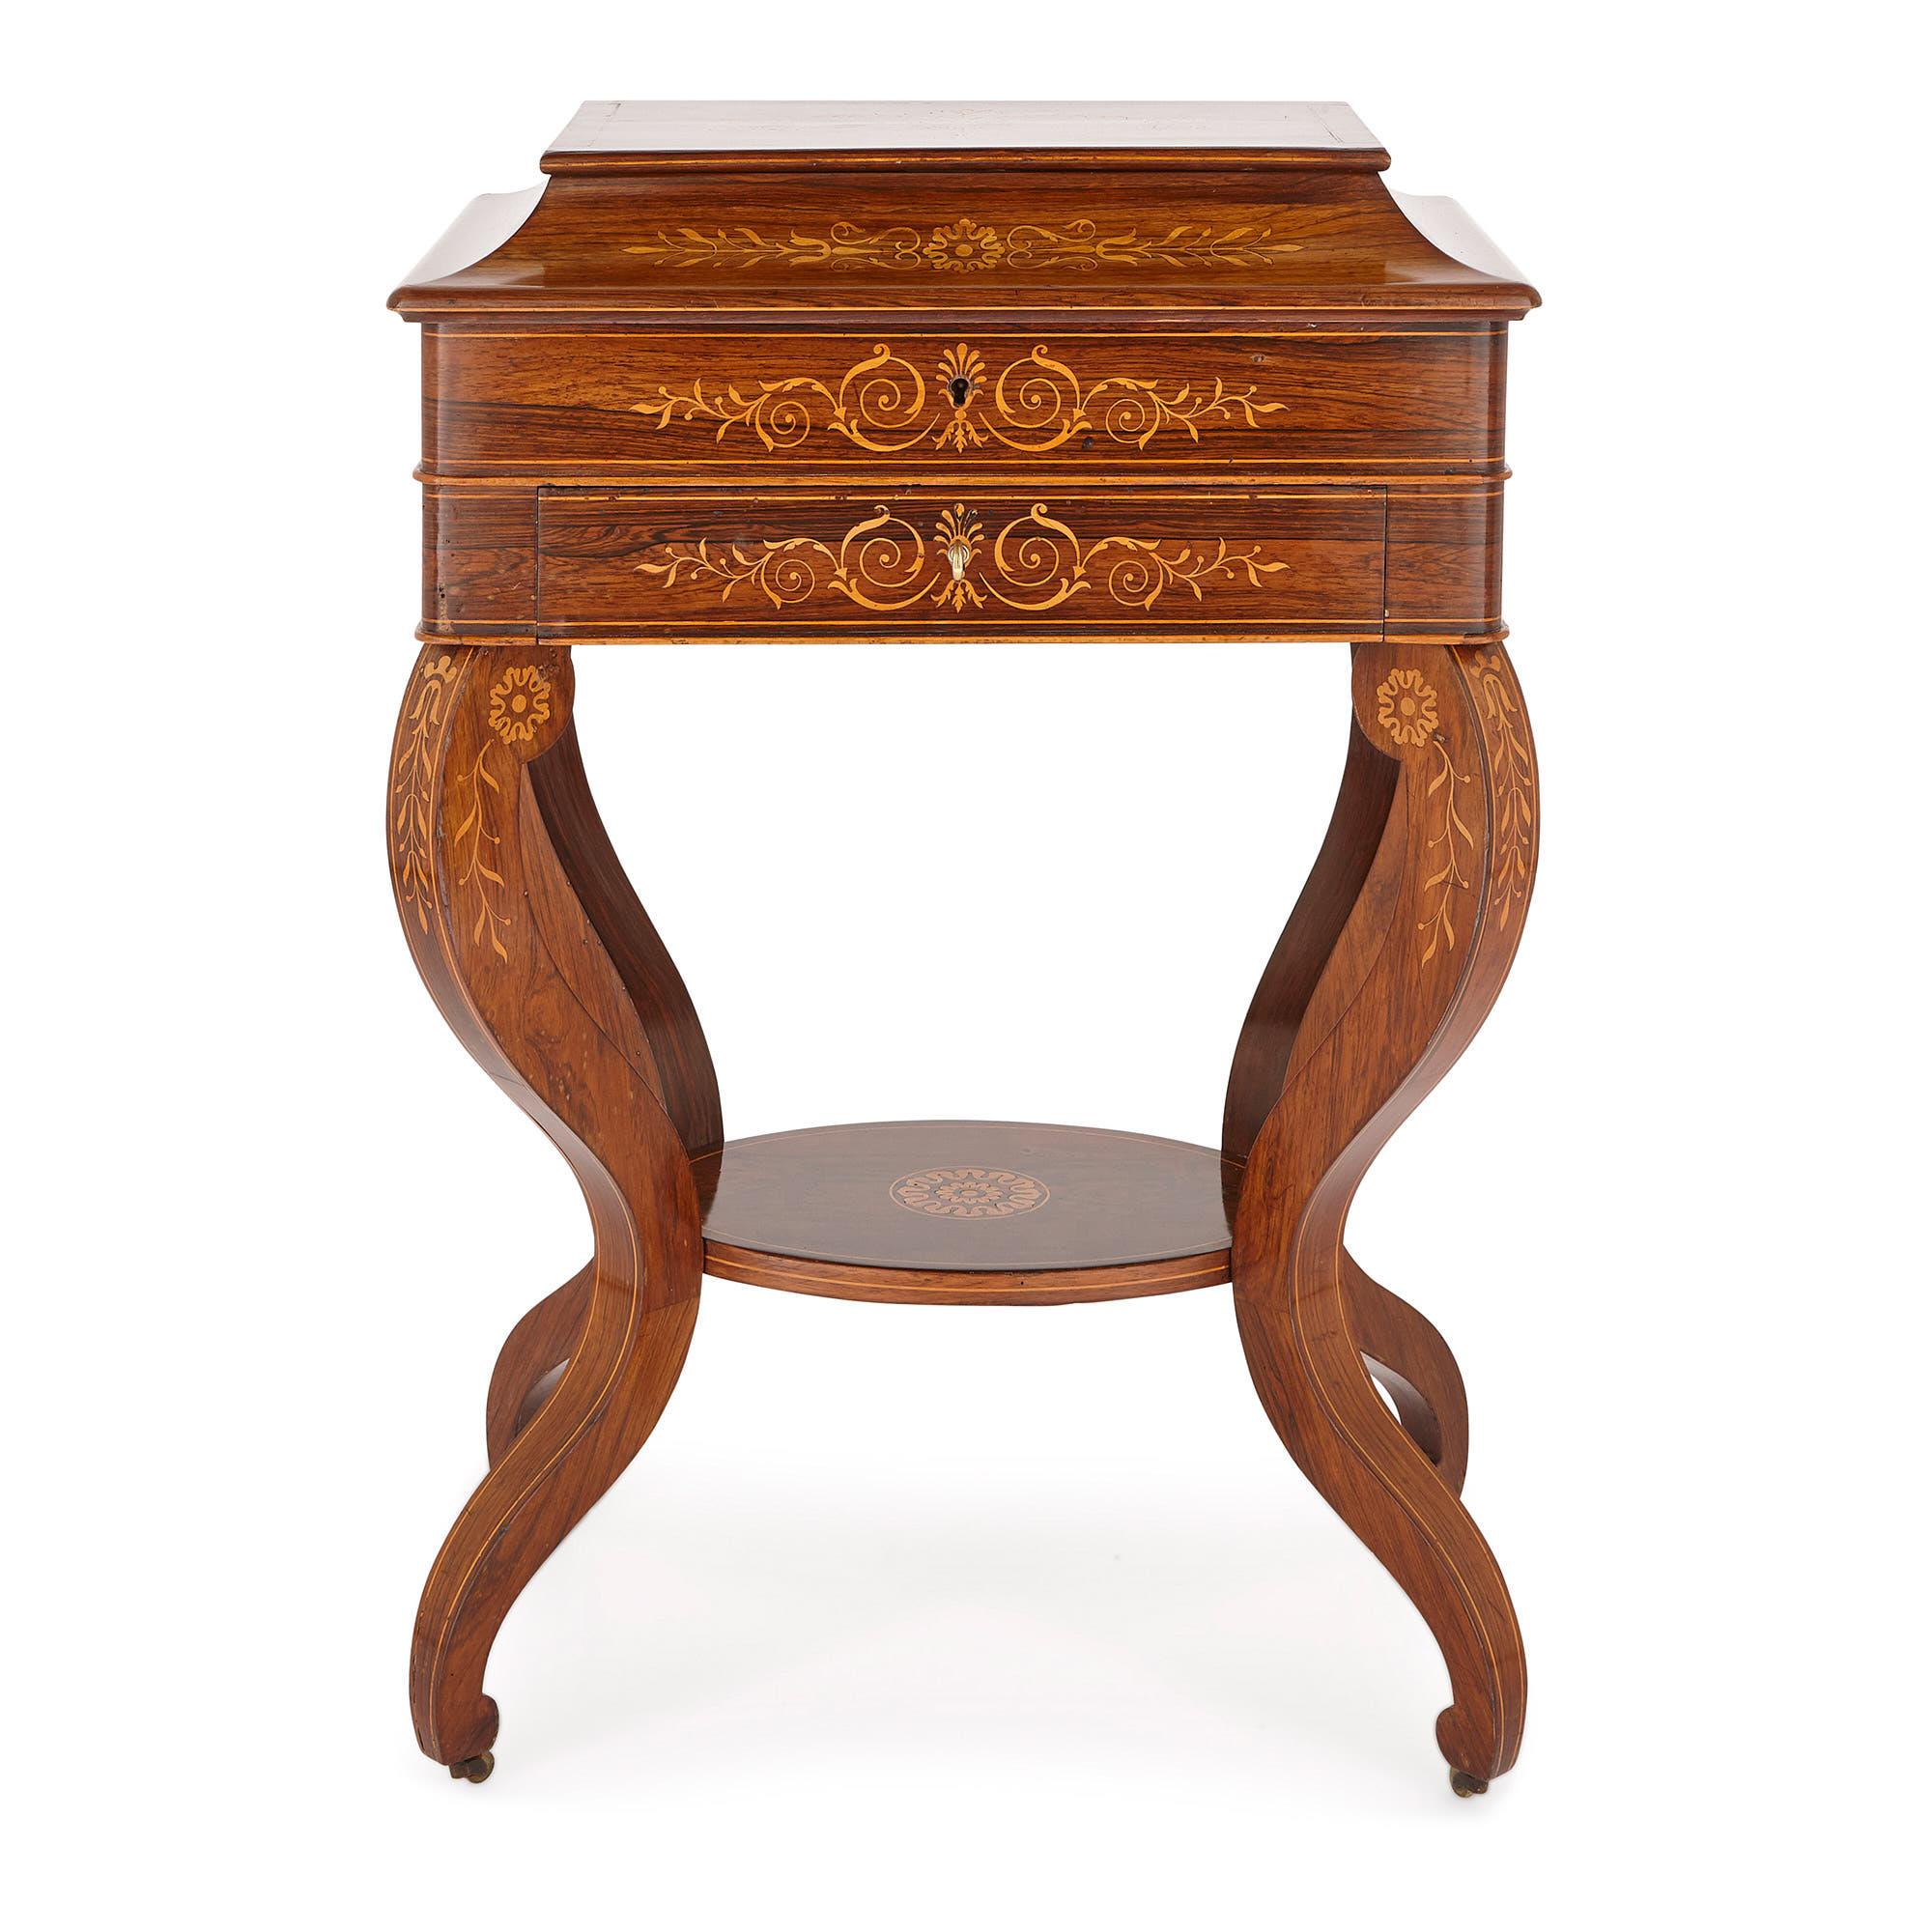 This cabinet was crafted in France at the end of the ‘Bourbon Restauration’ period. It is characteristically ‘Restauration’ in its style, with its curvaceous Neoclassical forms, and fine marquetry work. 

The cabinet is comprised of a two-storey